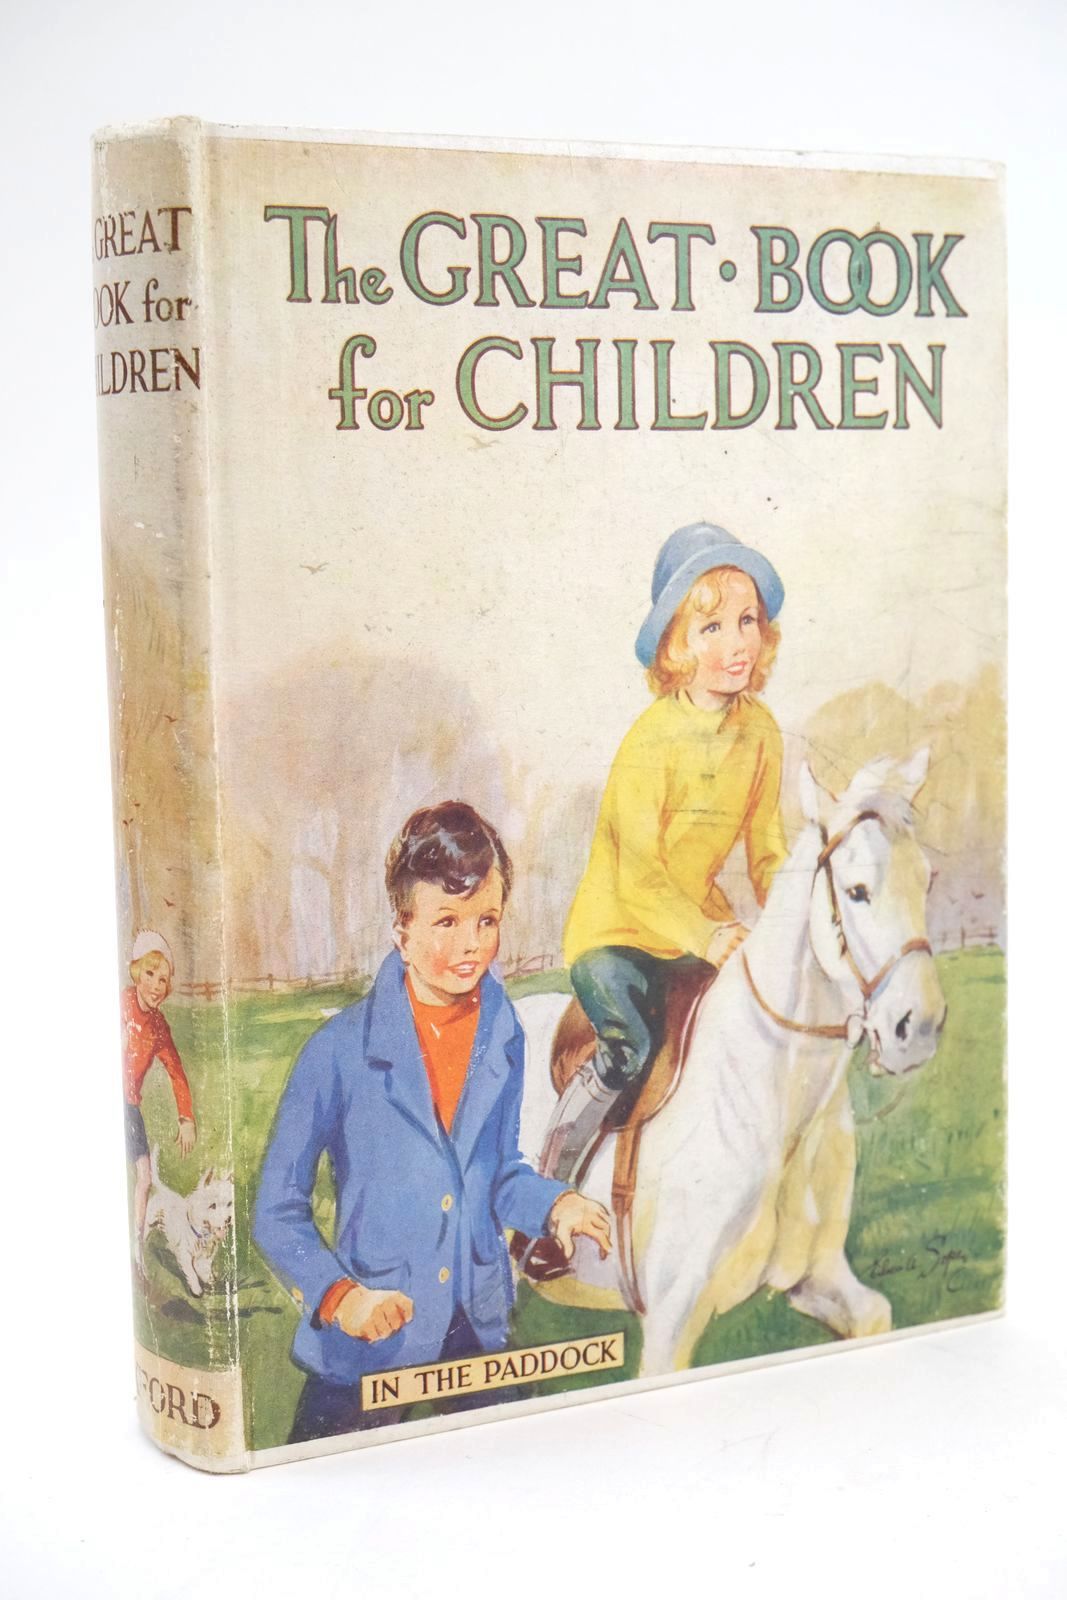 Photo of THE GREAT BOOK FOR CHILDREN written by Strang, Mrs. Herbert Coales, K. Wallis Carruthers, M.I.K. Oliver, Jocelyn et al, illustrated by Coales, K.W. Reeve, Mary S. Peart, M.A. et al., published by Oxford University Press, Humphrey Milford (STOCK CODE: 1324753)  for sale by Stella & Rose's Books